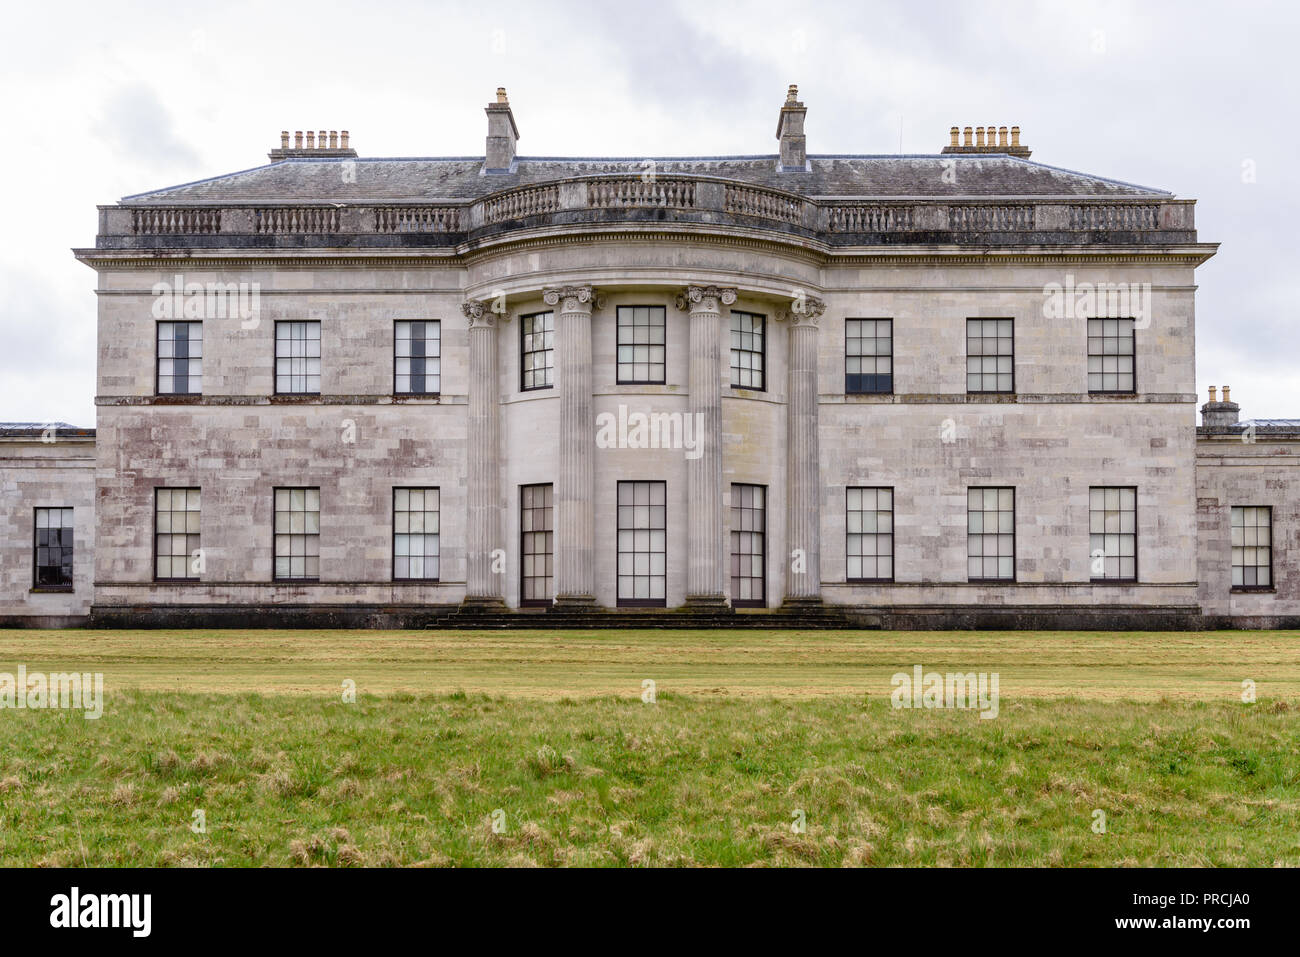 Castle Coole stately home, Enniskillen, owned my the National Trust. Stock Photo